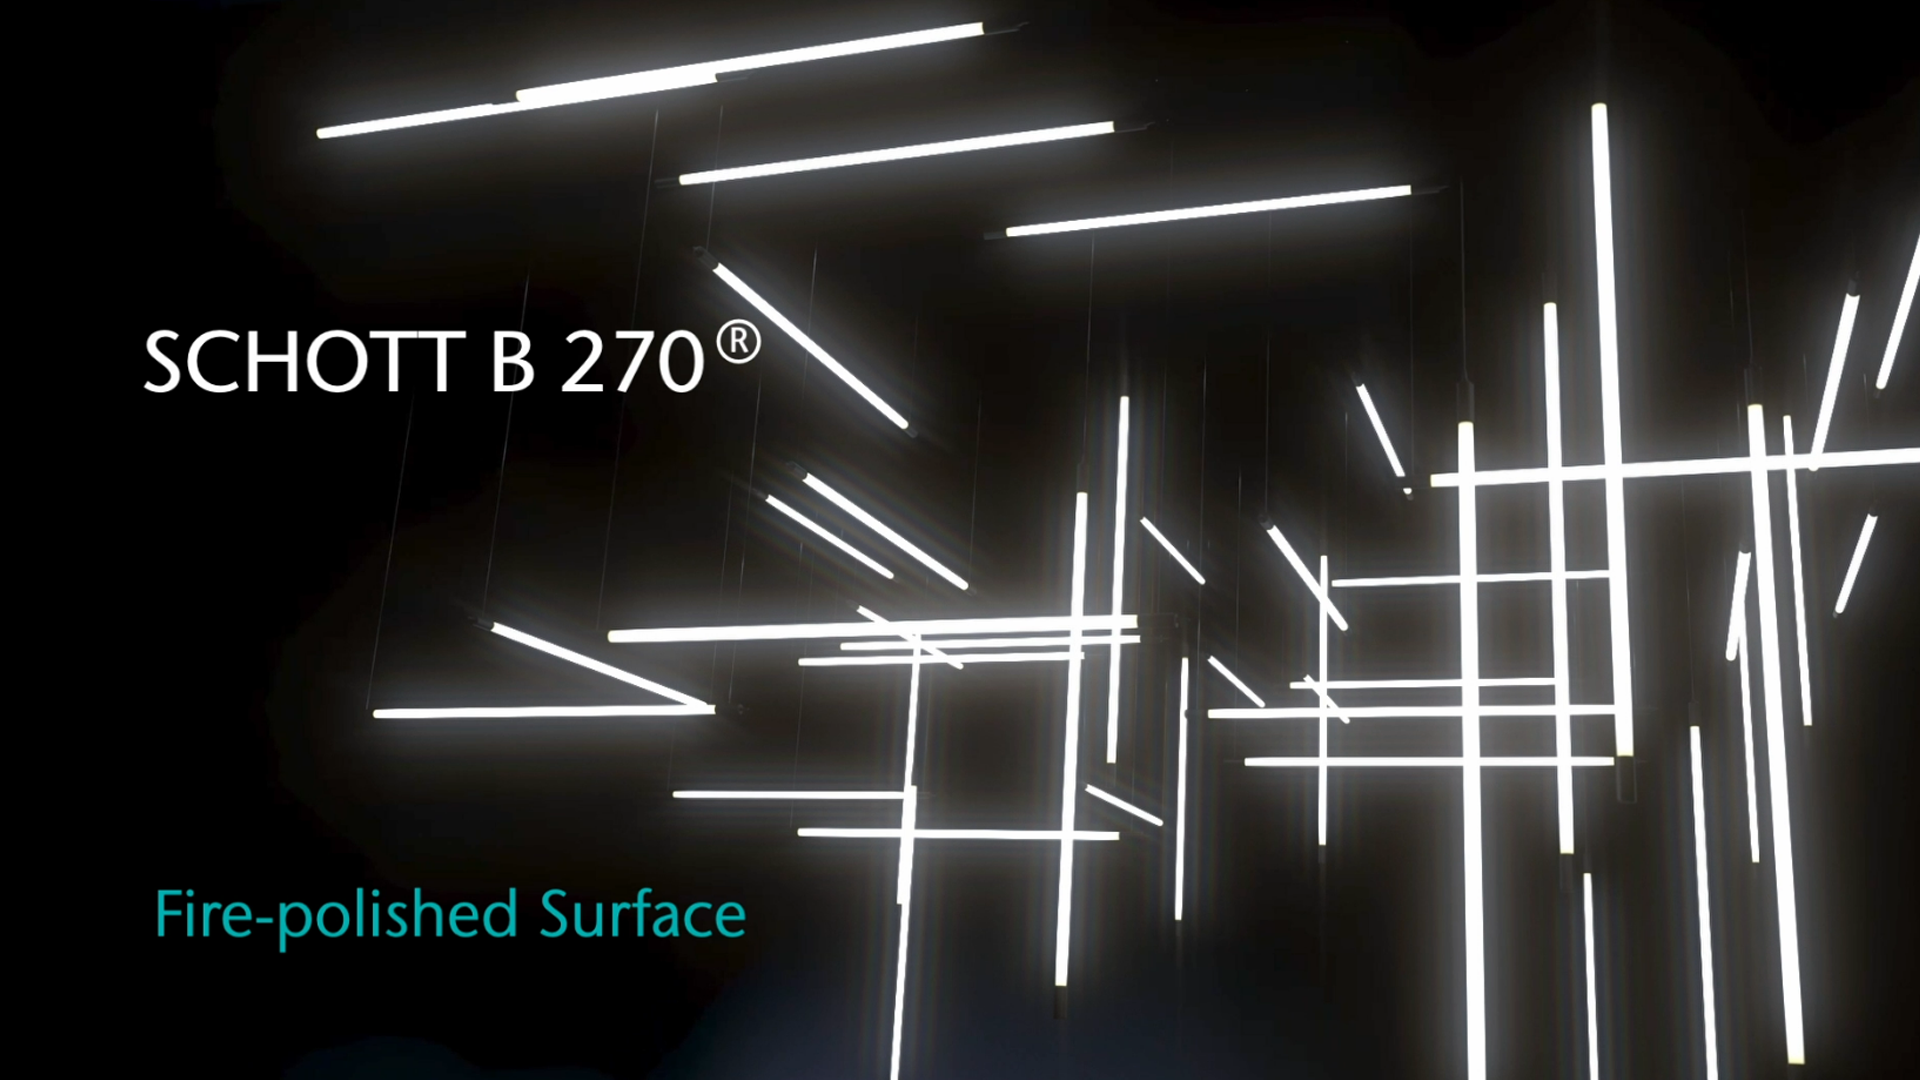 A lot of white fluorescent tubes floating on different levels at right angles to each other in a dark room. In front of it is a hovering text: “SCHOTT B 270® - Fire-polished Surface.